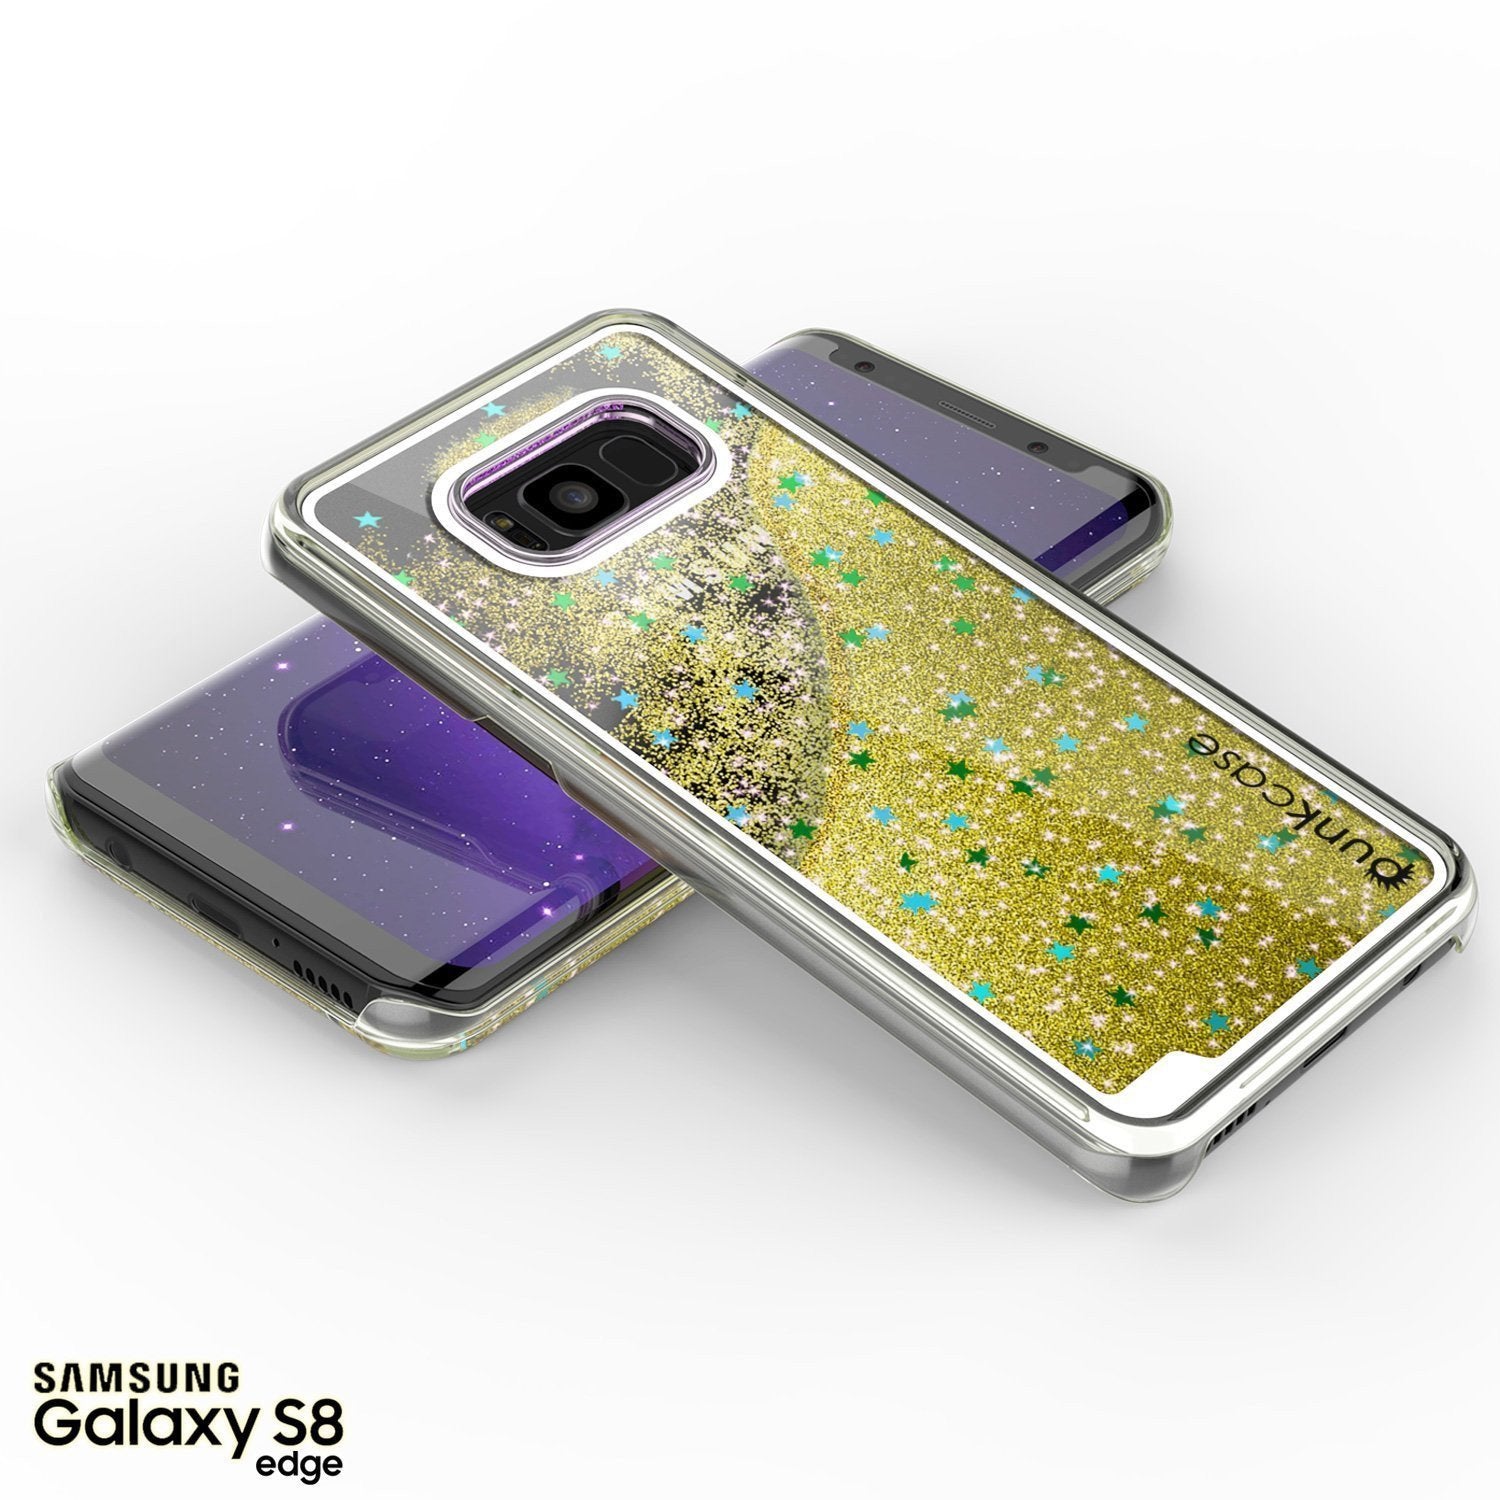 Galaxy S8 Case, Punkcase [Liquid Series] Protective Dual Layer Floating Glitter Cover [Gold]